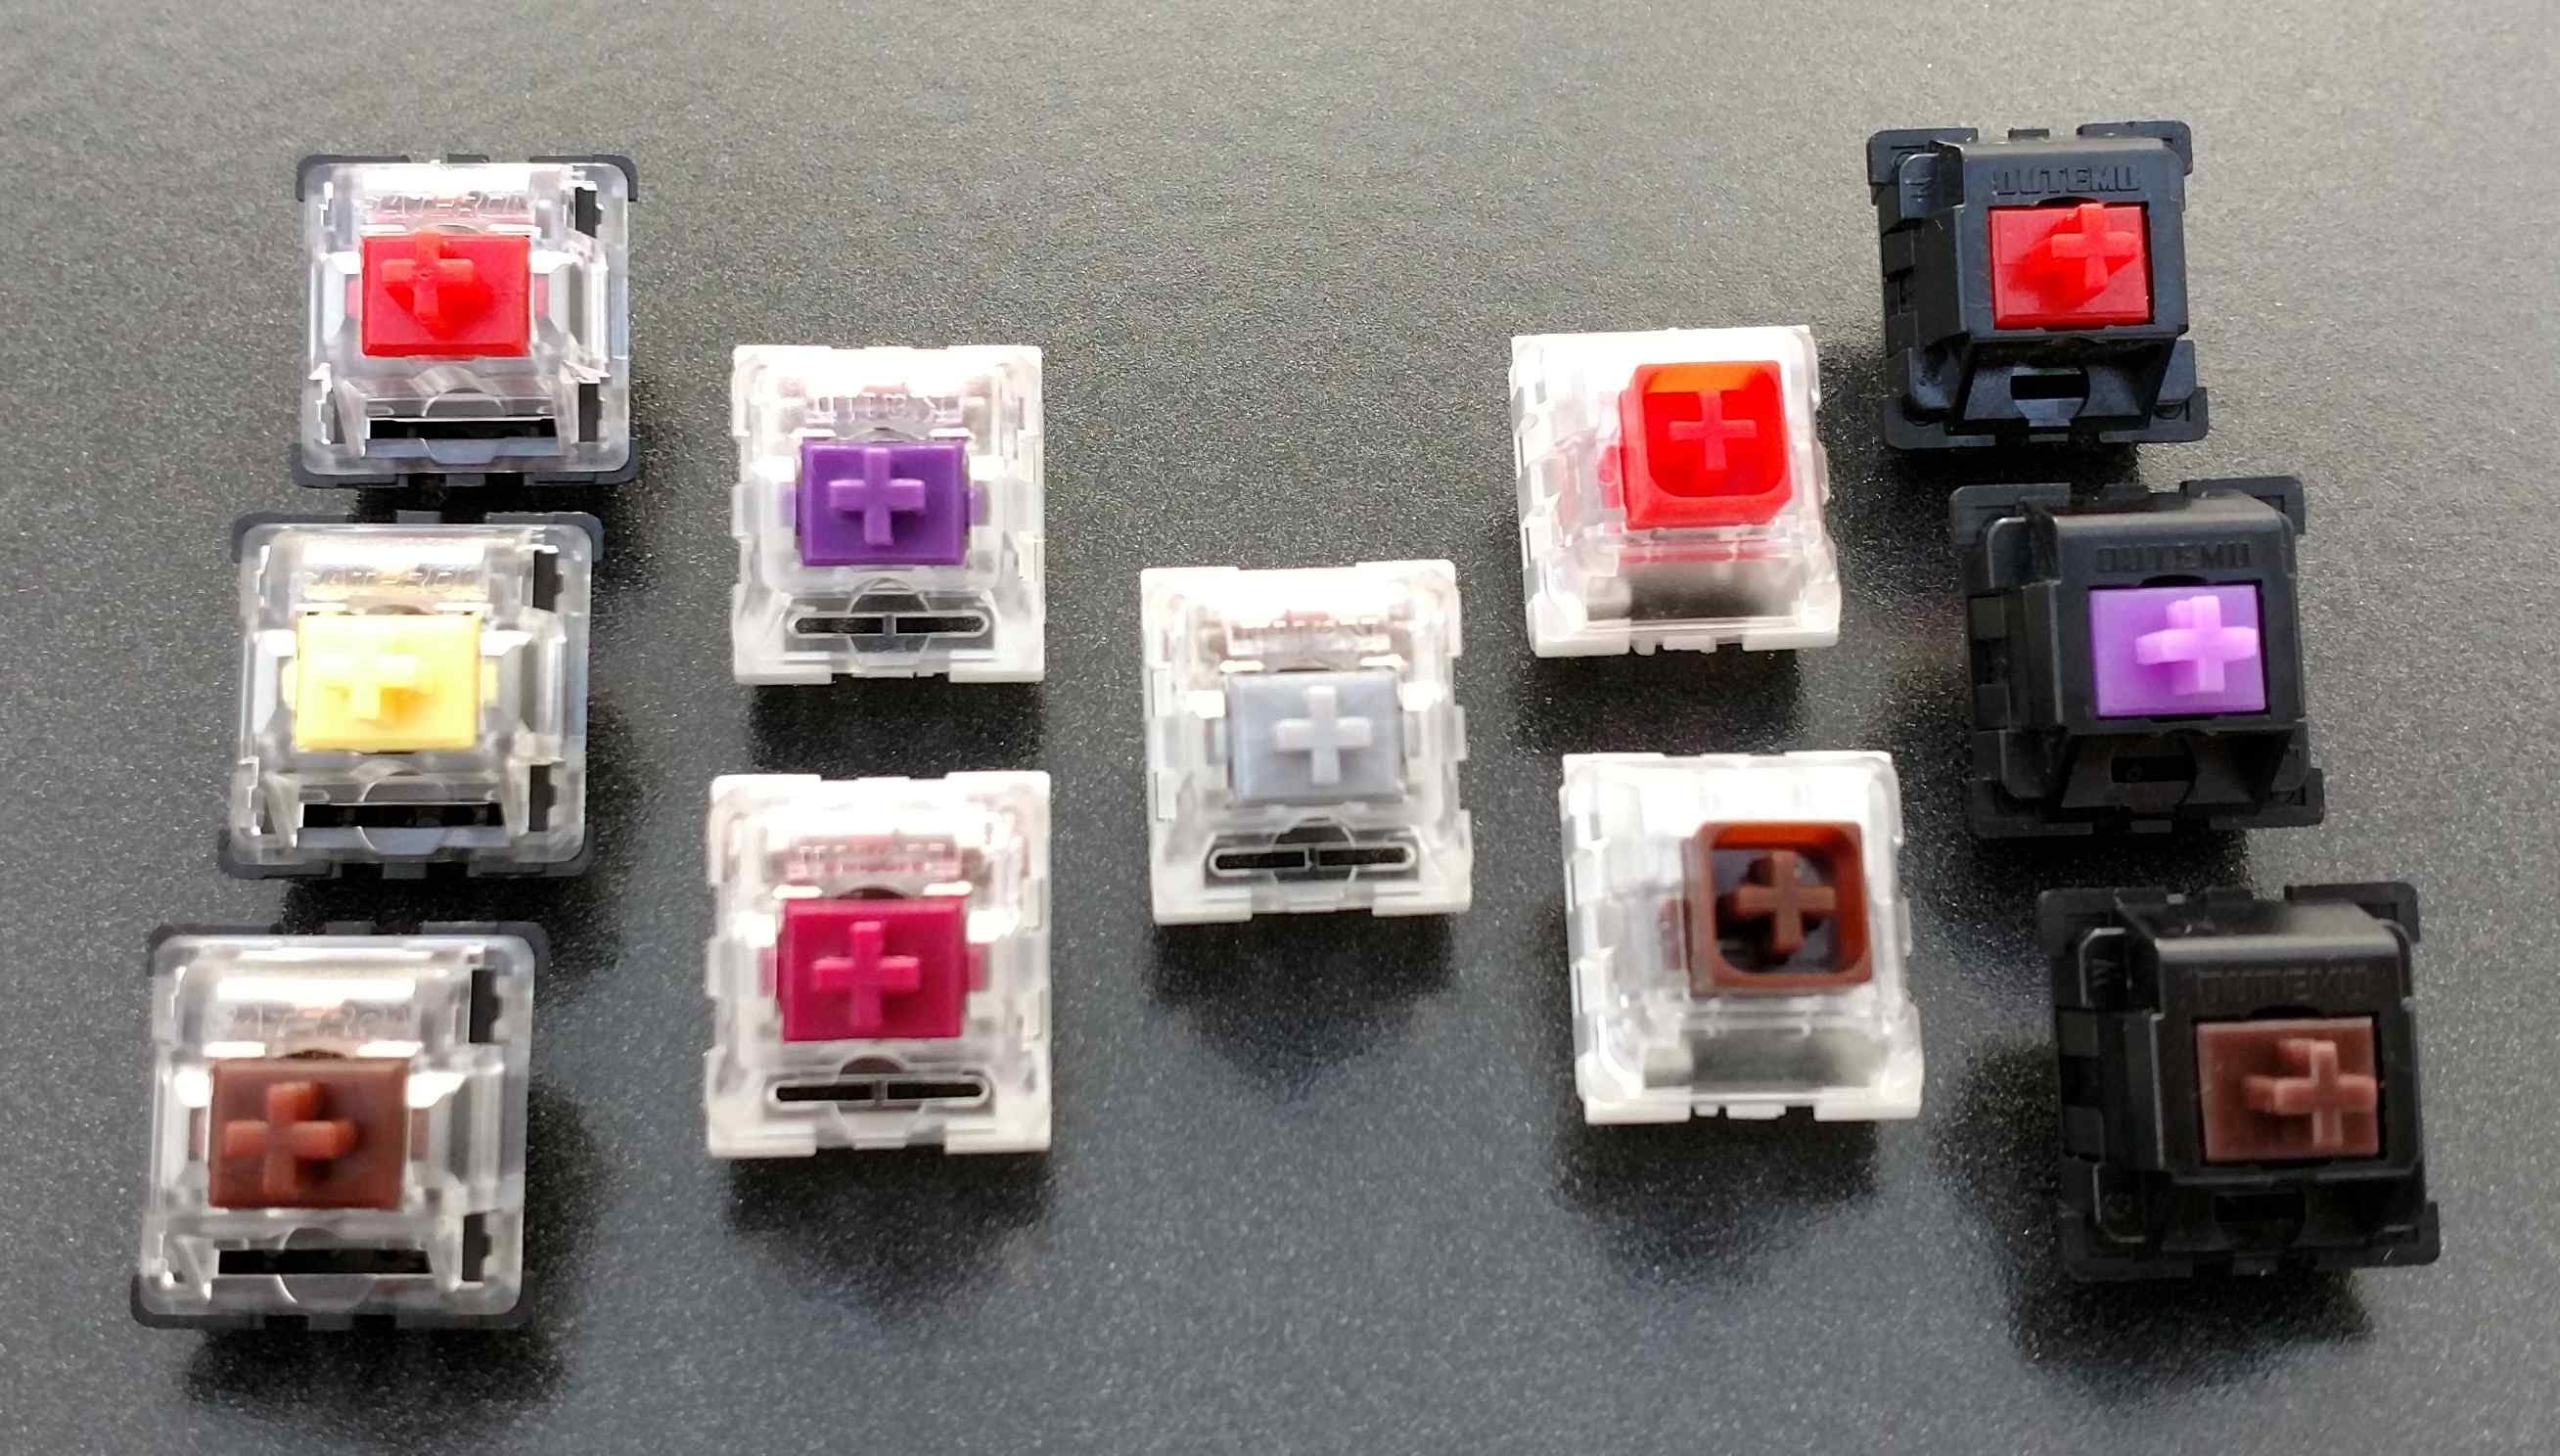 All the single switches I tried displayed in a rather arbitrary 3–2–1–2–3 arrangement.